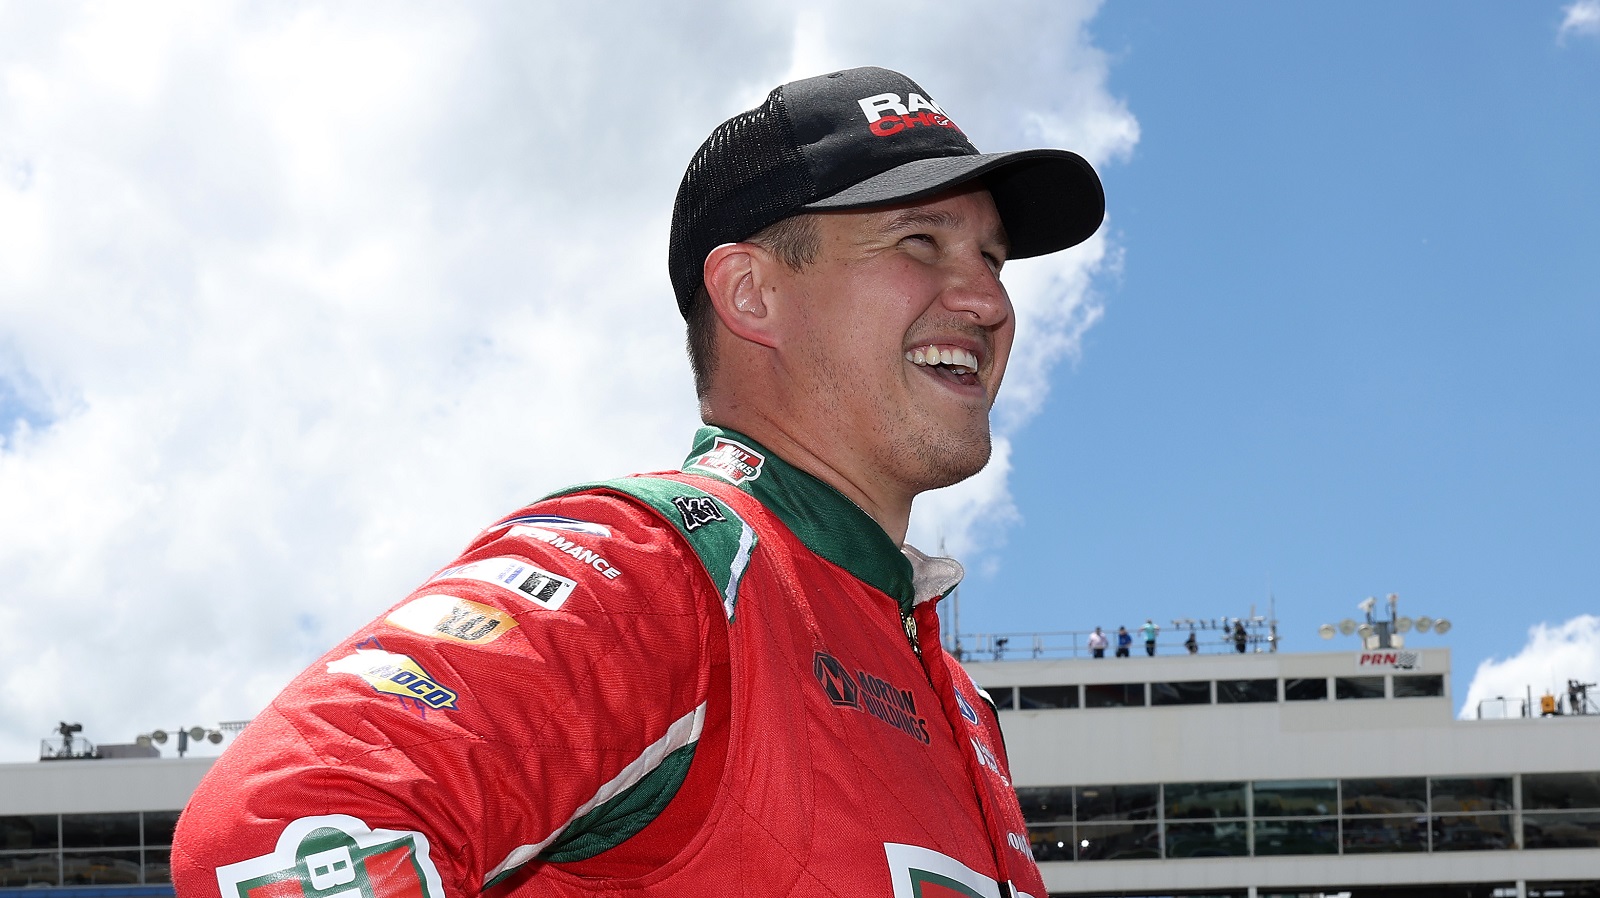 Ryan Preece looks on during qualifying for the NASCAR Xfinity Series Alsco Uniforms 300 at Charlotte Motor Speedway on May 27, 2022.